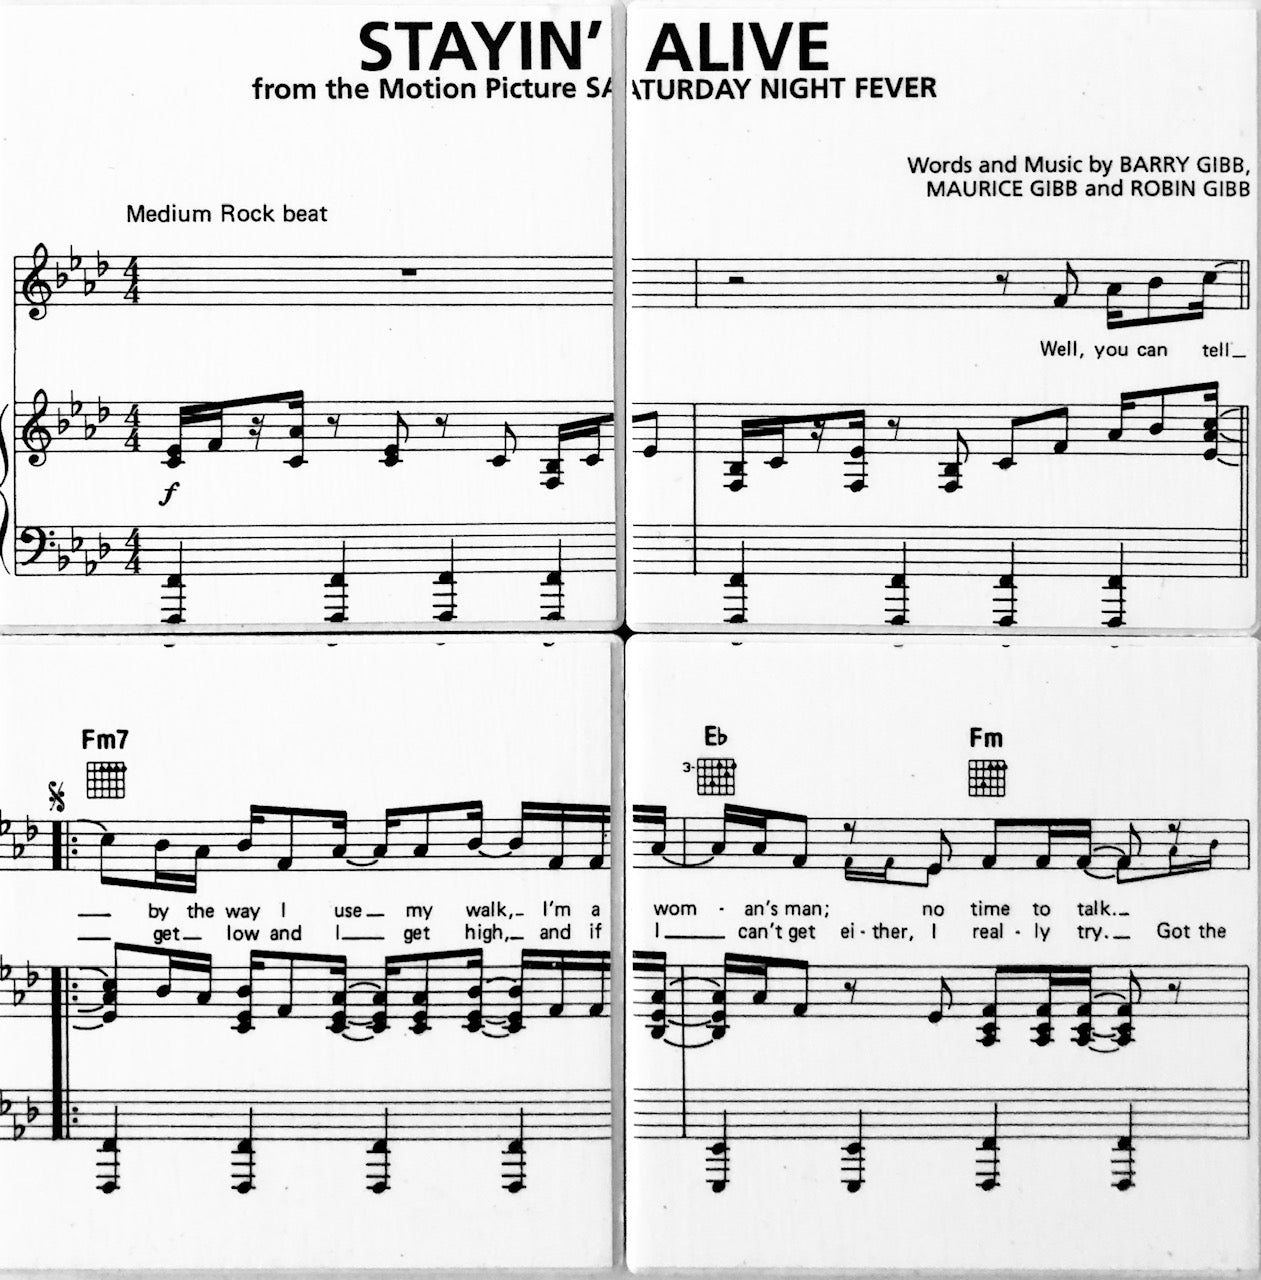 BEE GEES - Stayin' Alive